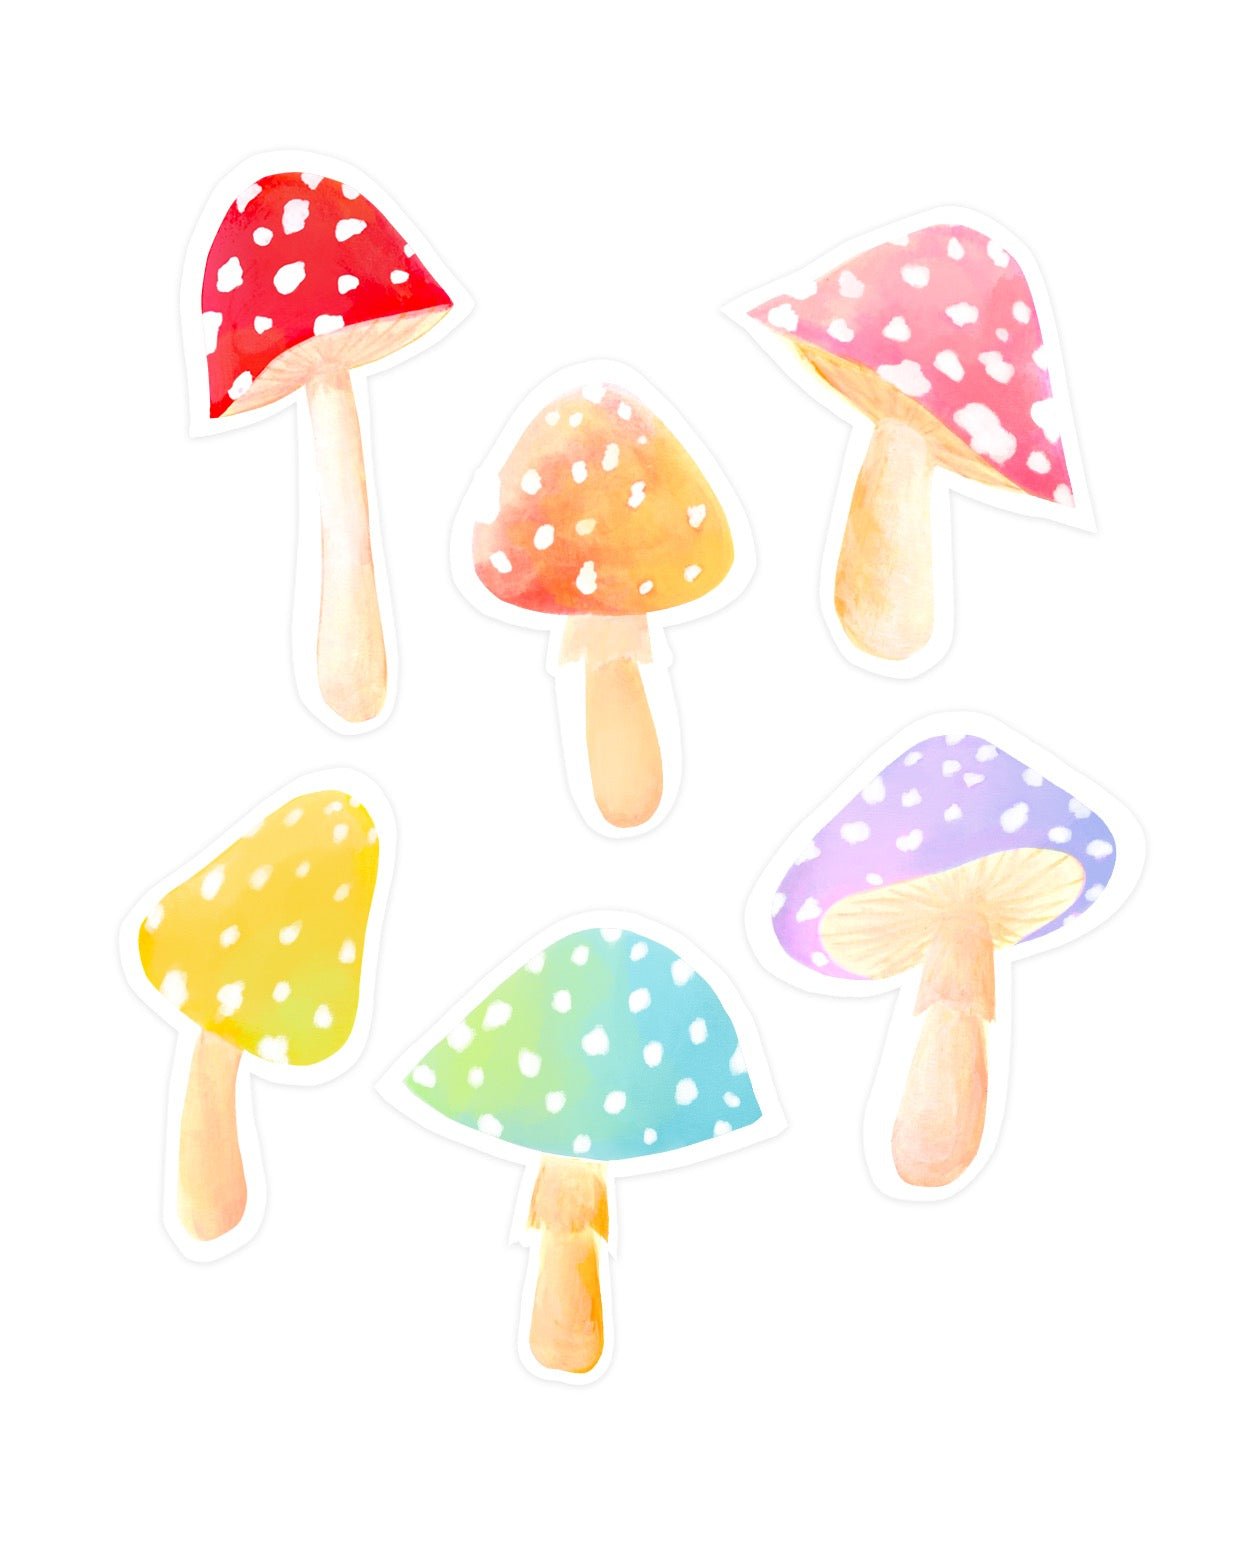 Red, orange, pink, yellow, blue, and purple mushrooms in this soft touch sticker pack.